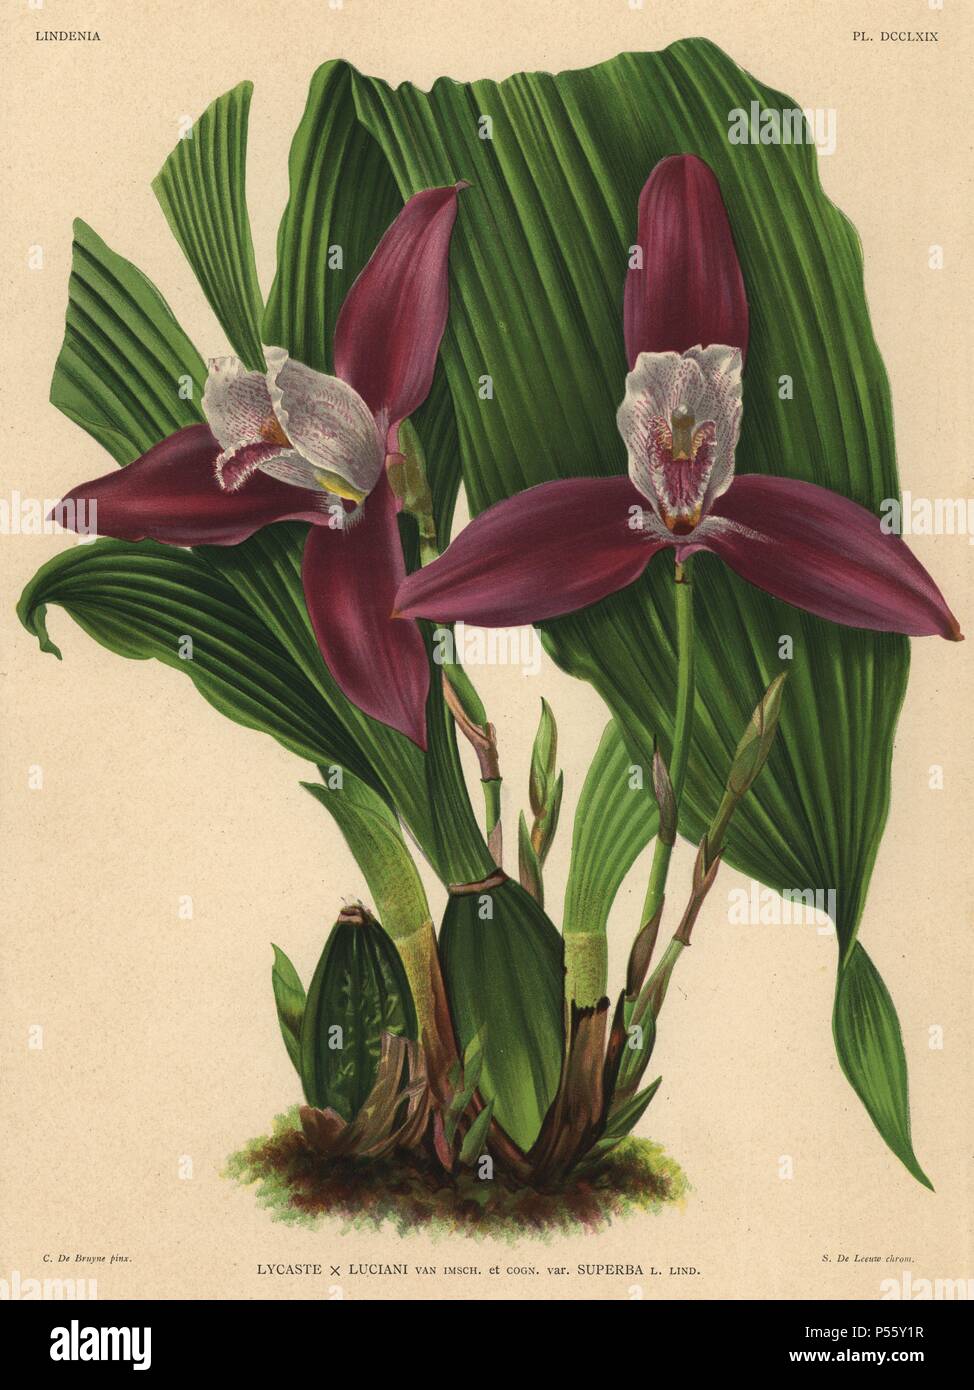 Lycaste x Luciani hybrid orchid, superb variety. Illustration drawn by C. de Bruyne and chromolithographed by S. de Leeuw from Lucien Linden's 'Lindenia, Iconographie des Orchidees,' Brussels, 1902. Stock Photo